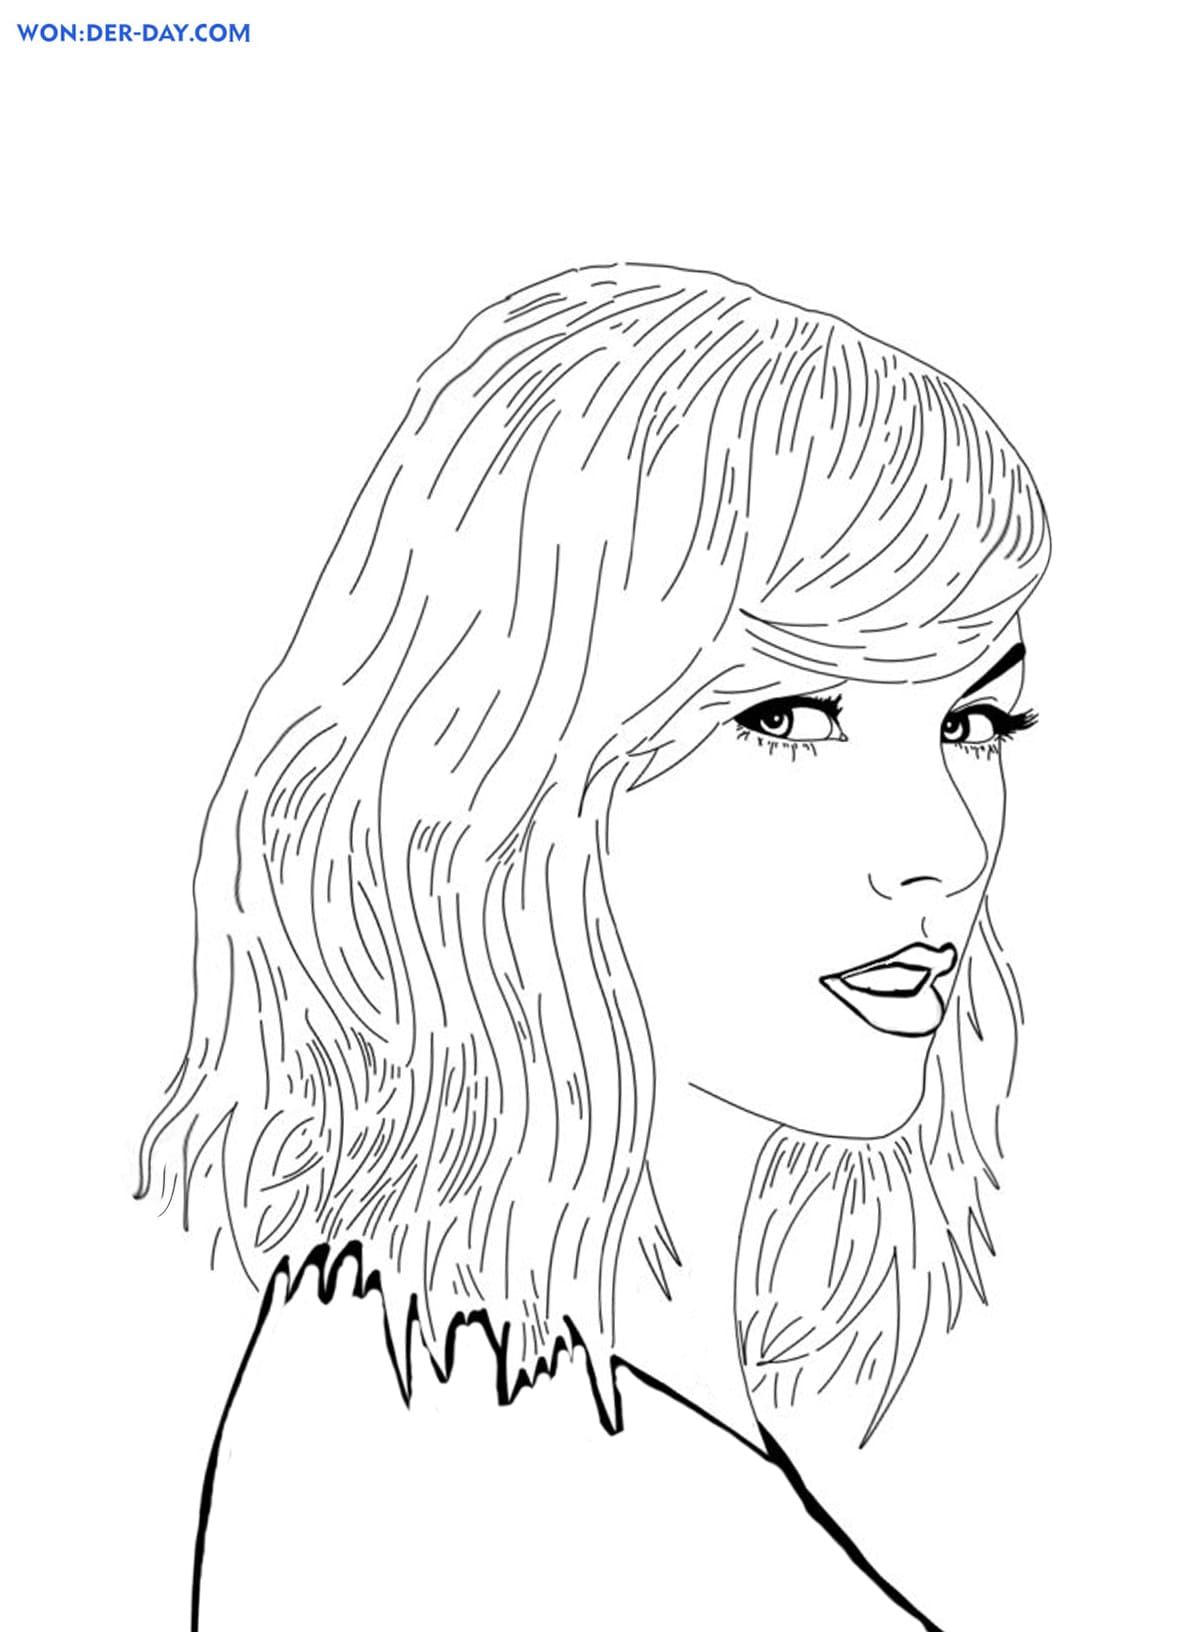 Taylor Swift Coloring Pages Print For Free Wonder Day Coloring Pages For Children And Adults - brooding black hair roblox